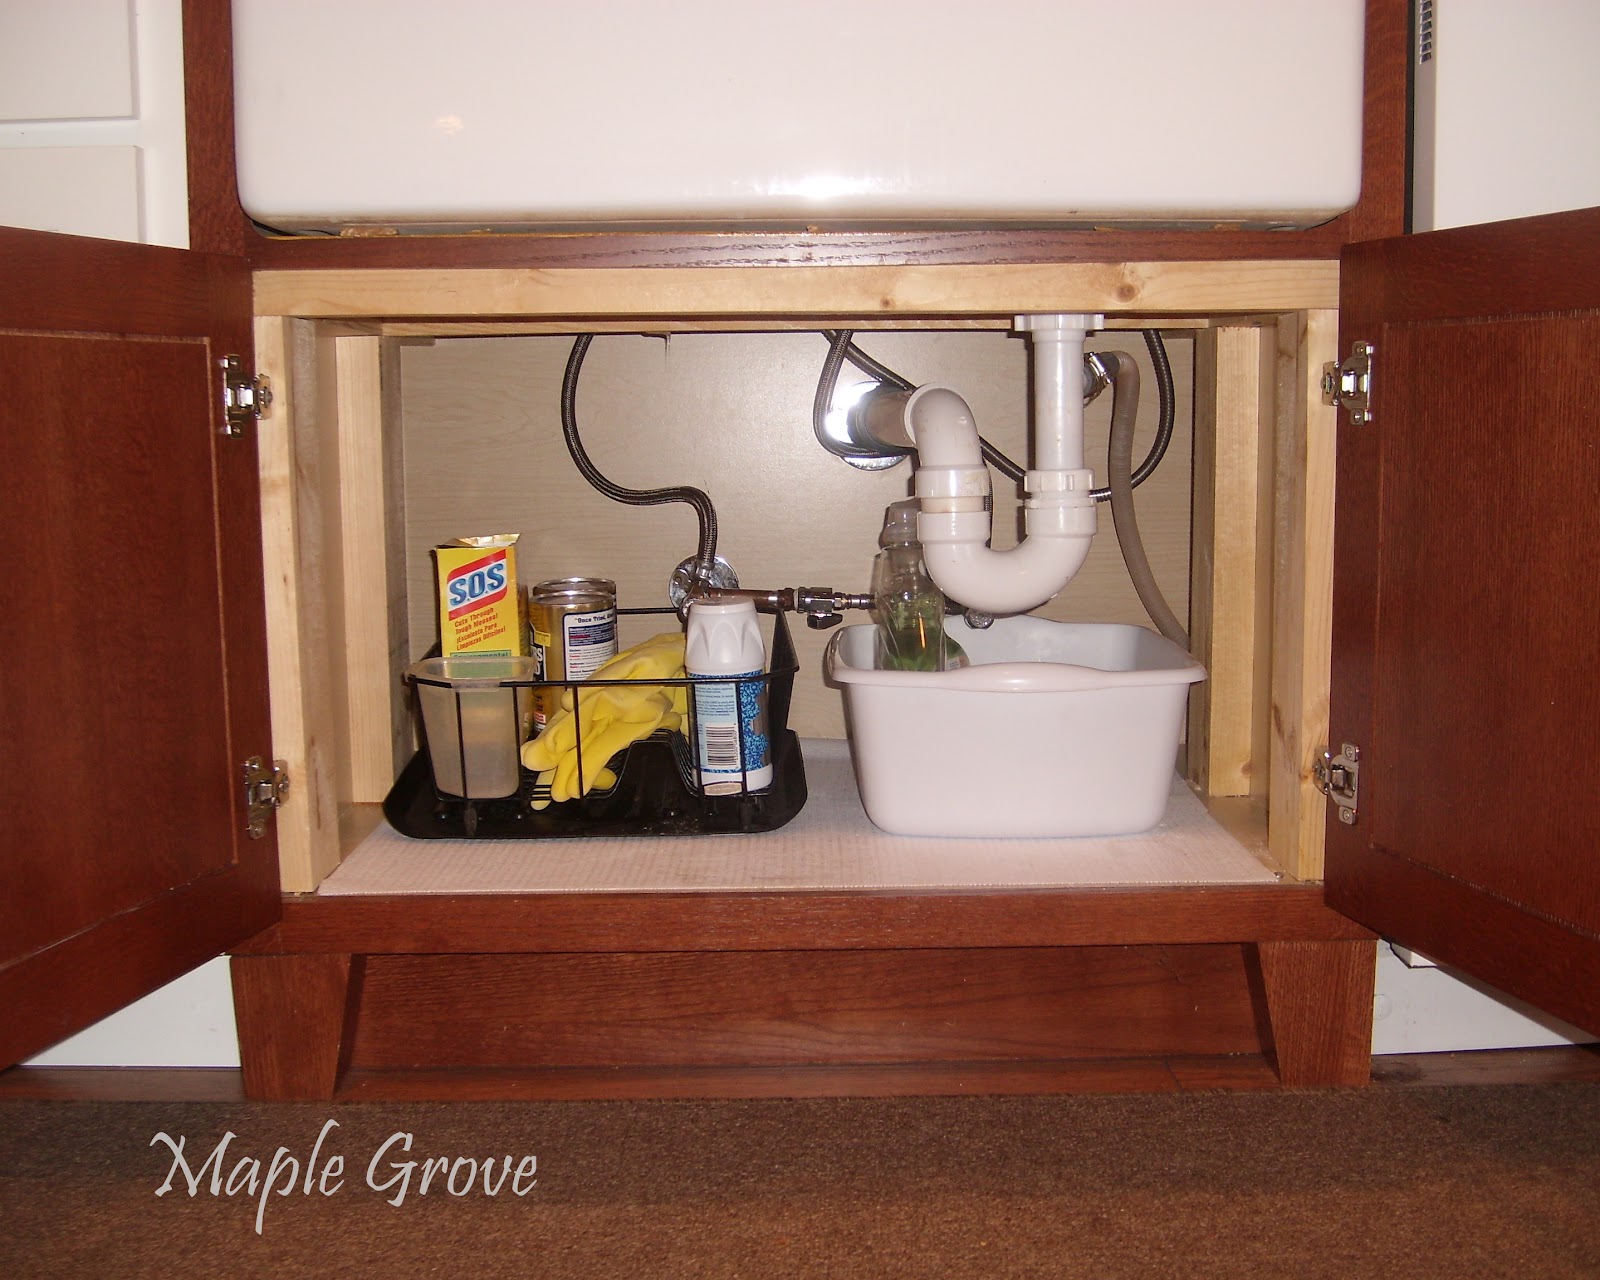 How to Build a Farmhouse Sink Base Cabinet - Houseful of Handmade